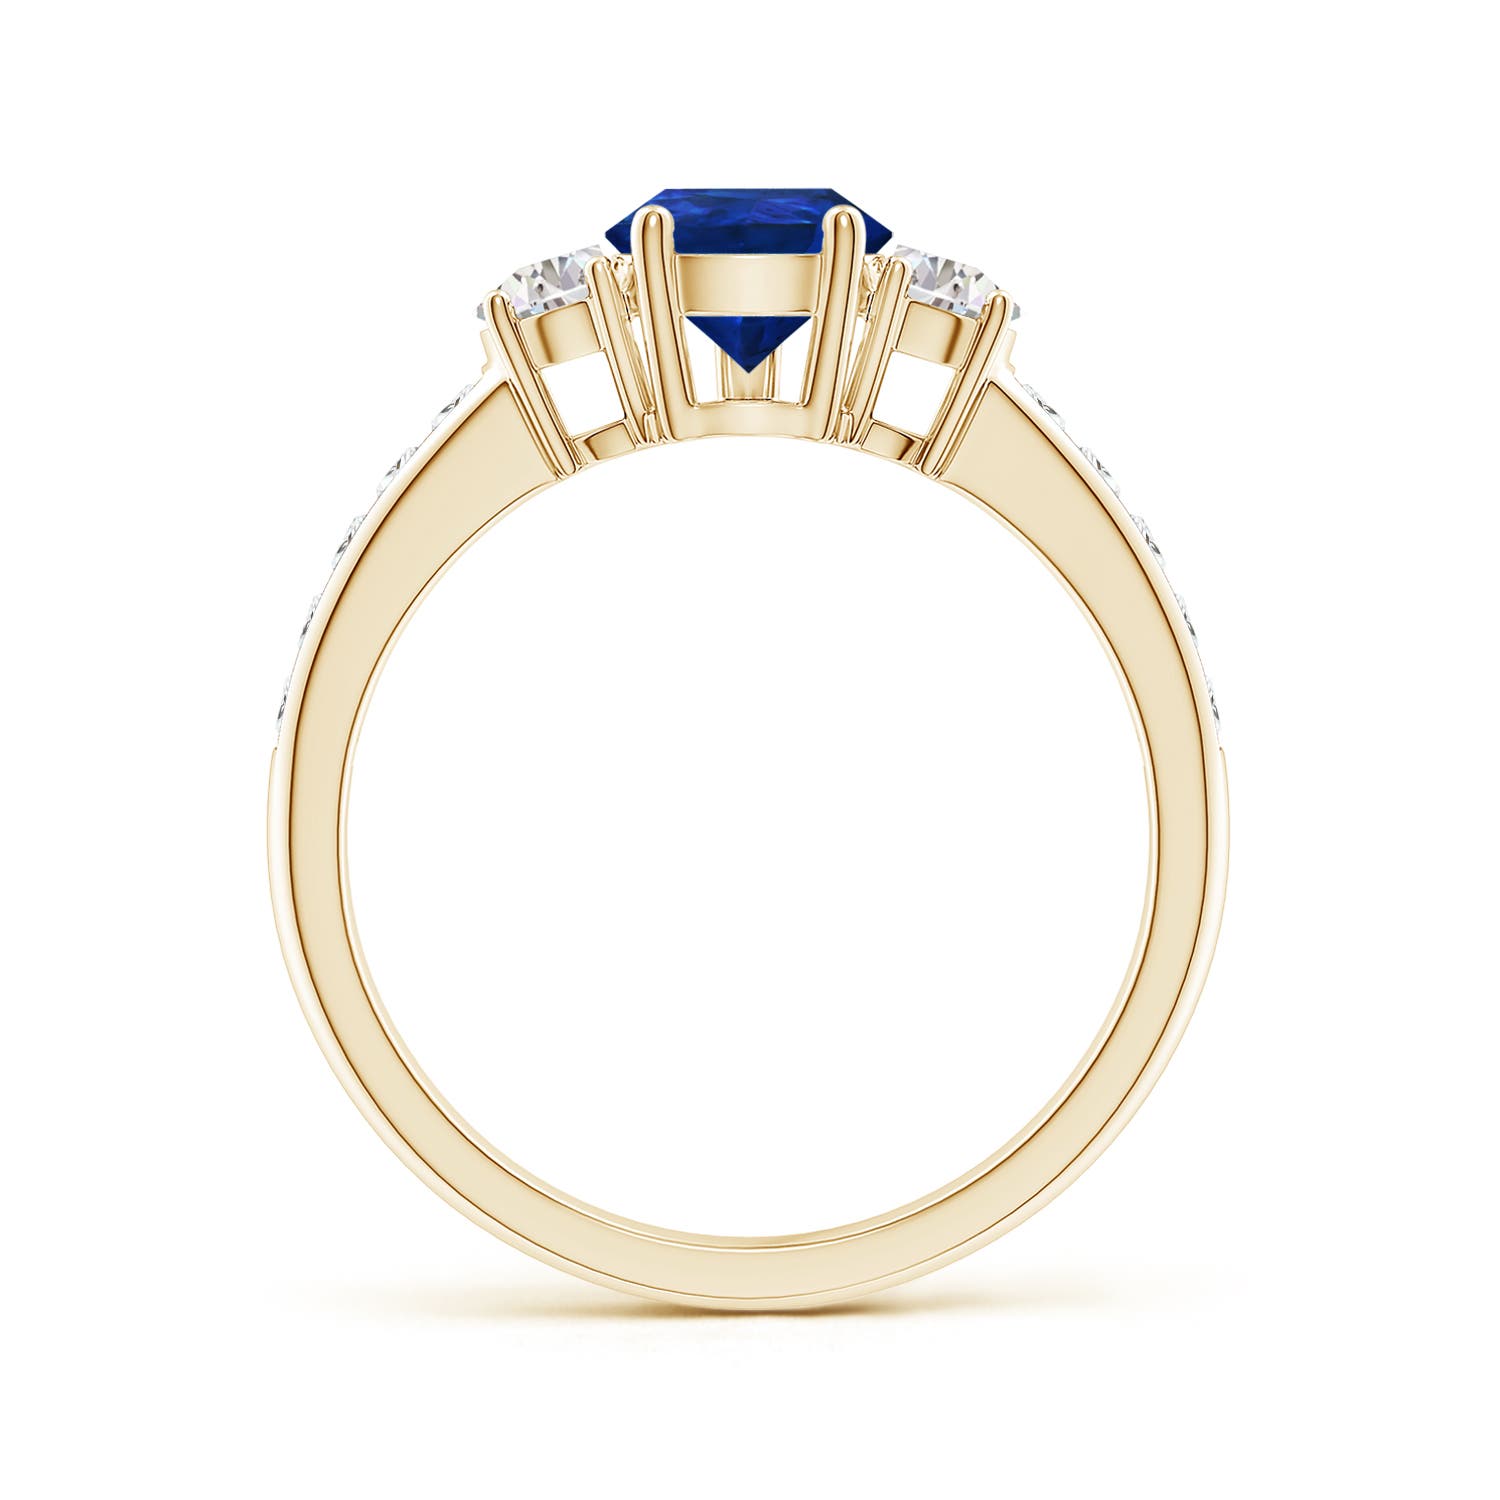 AAA - Blue Sapphire / 2.01 CT / 14 KT Yellow Gold